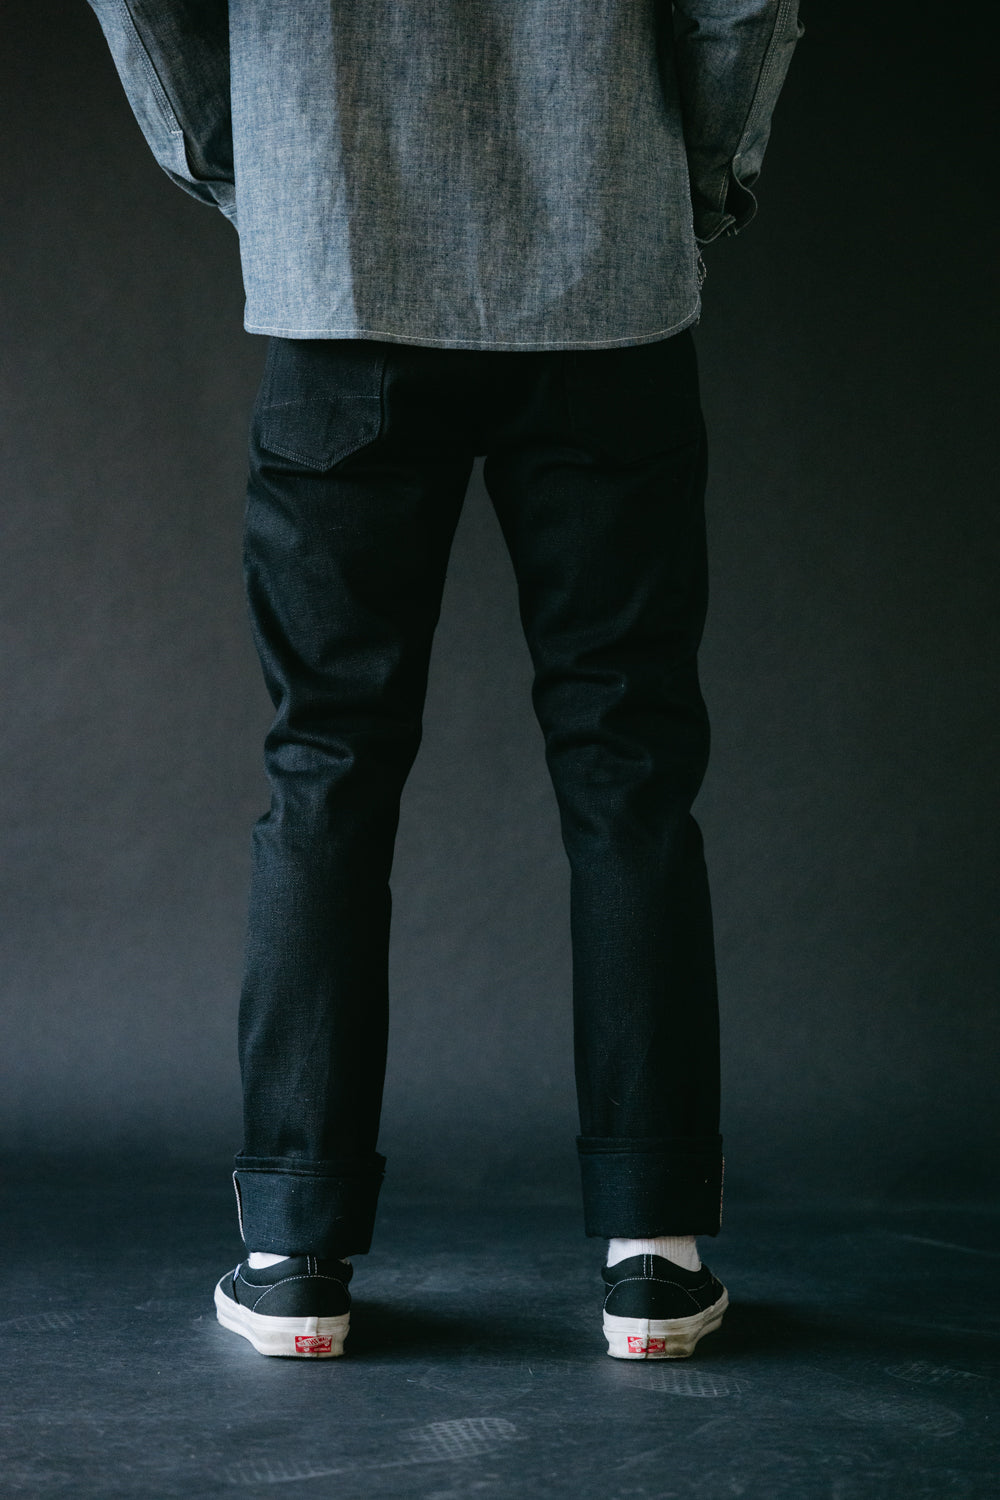 17oz - Cryptic Stealth Selvedge - SK Fit